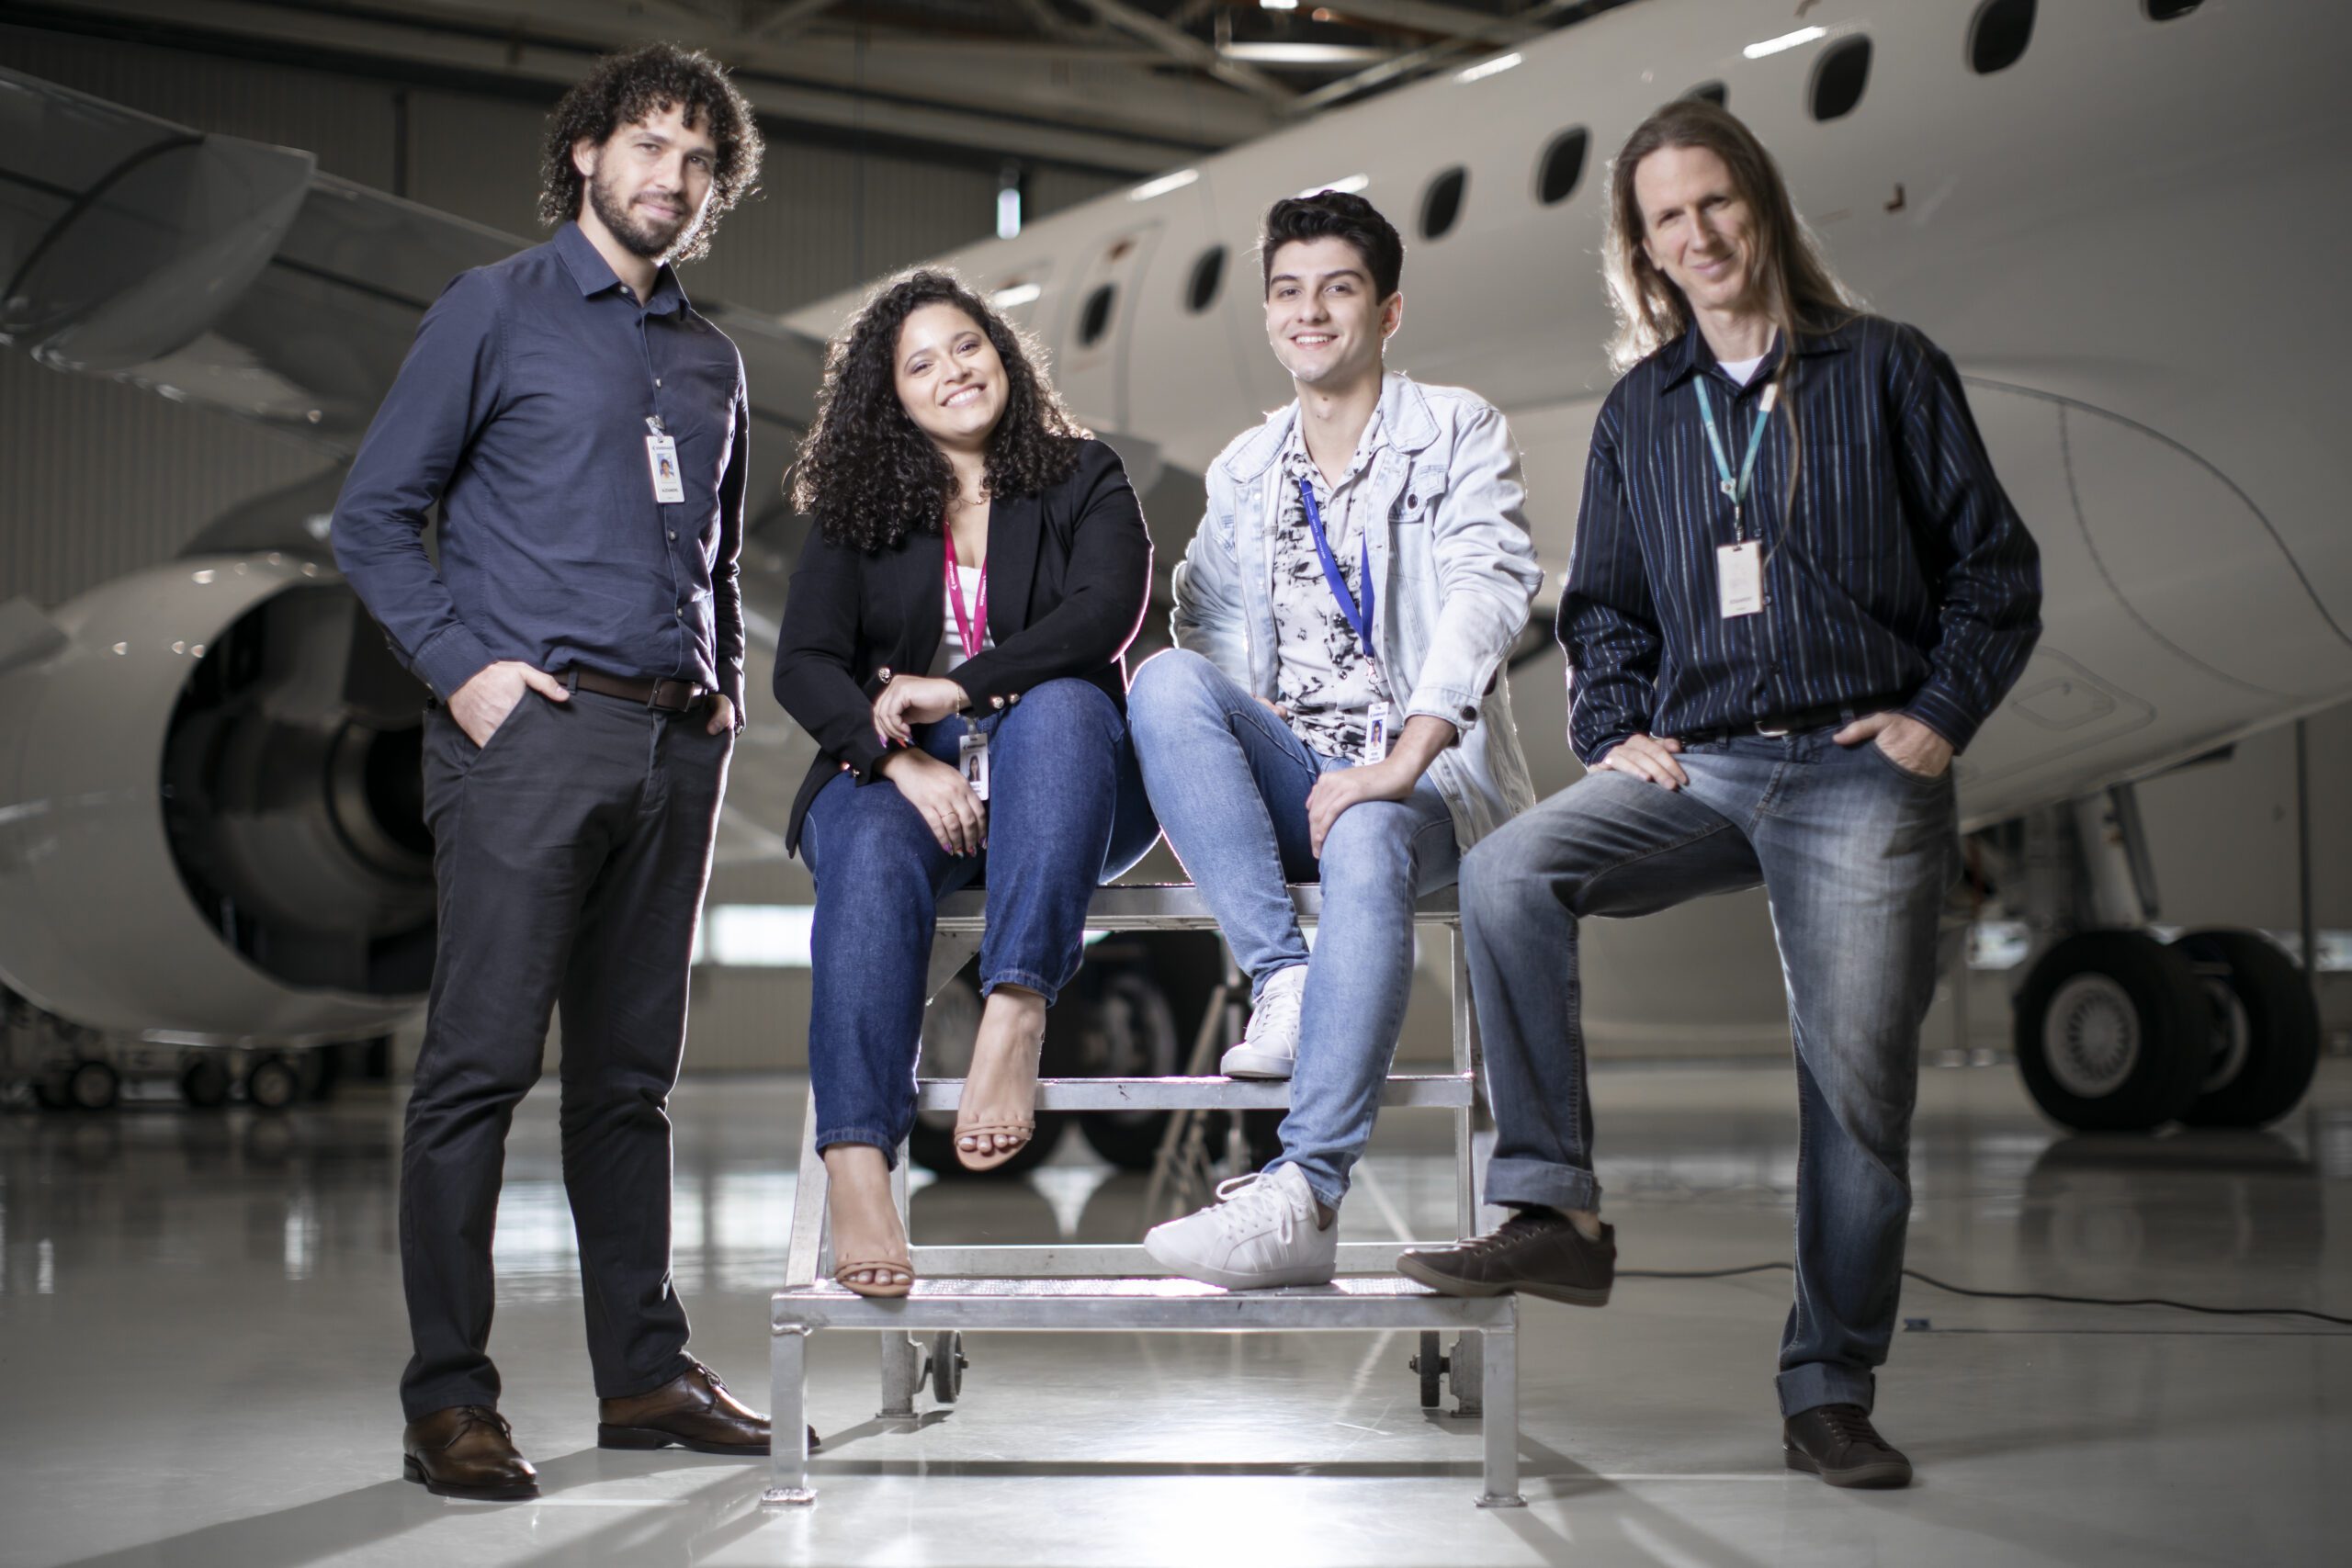 Embraer Extends Registrations for the Master in Aeronautical Engineering